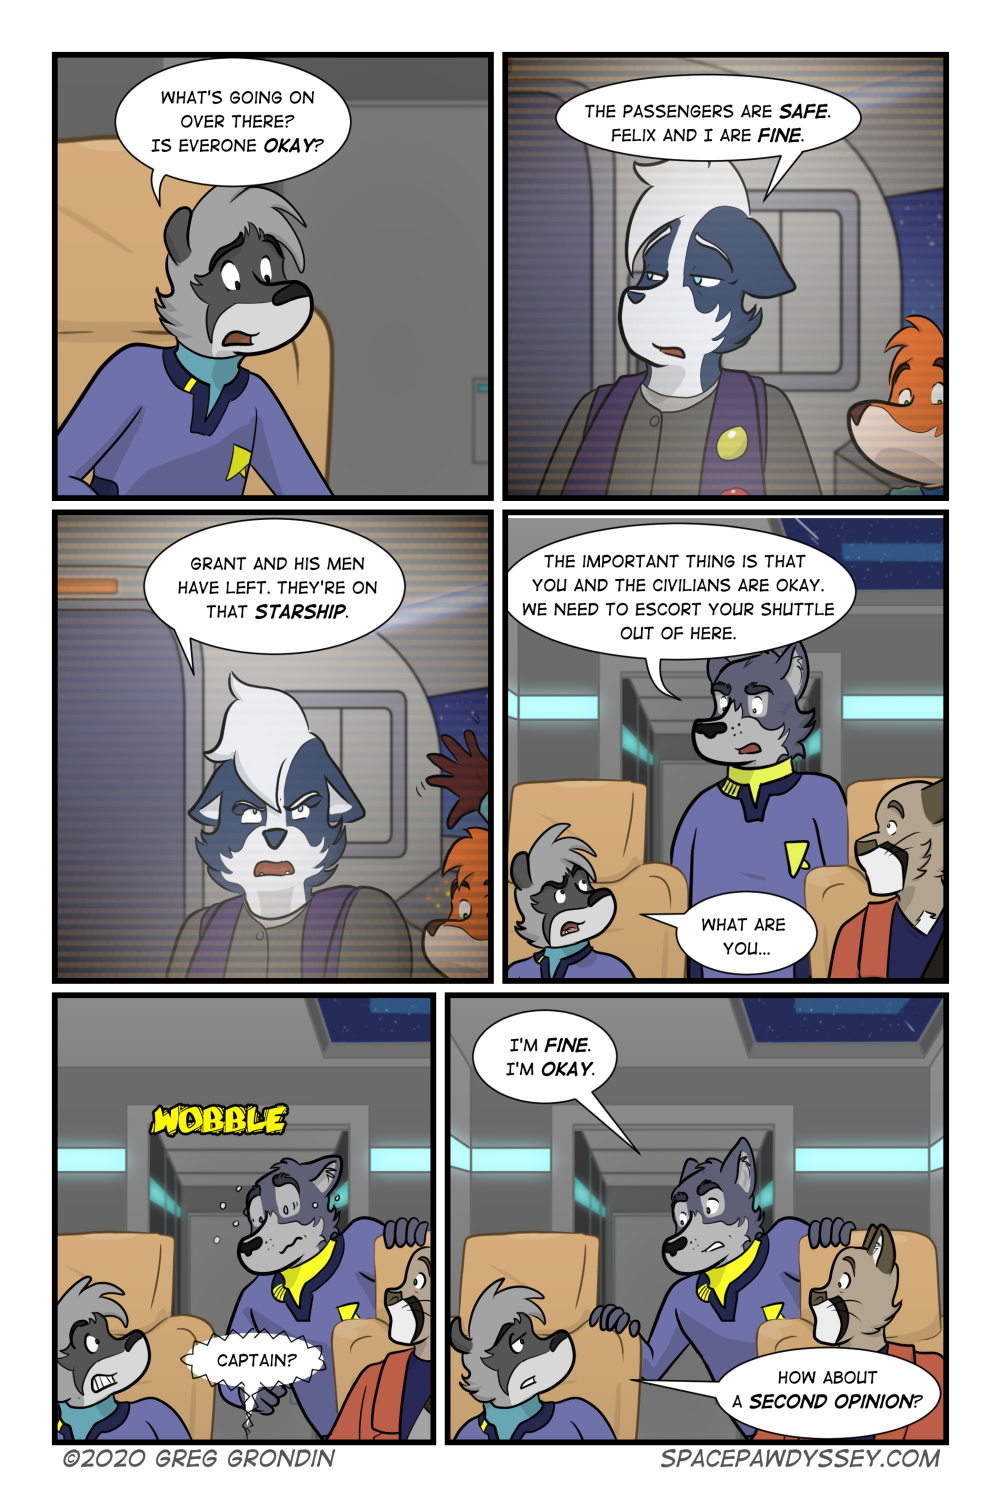 Space Pawdyssey #350